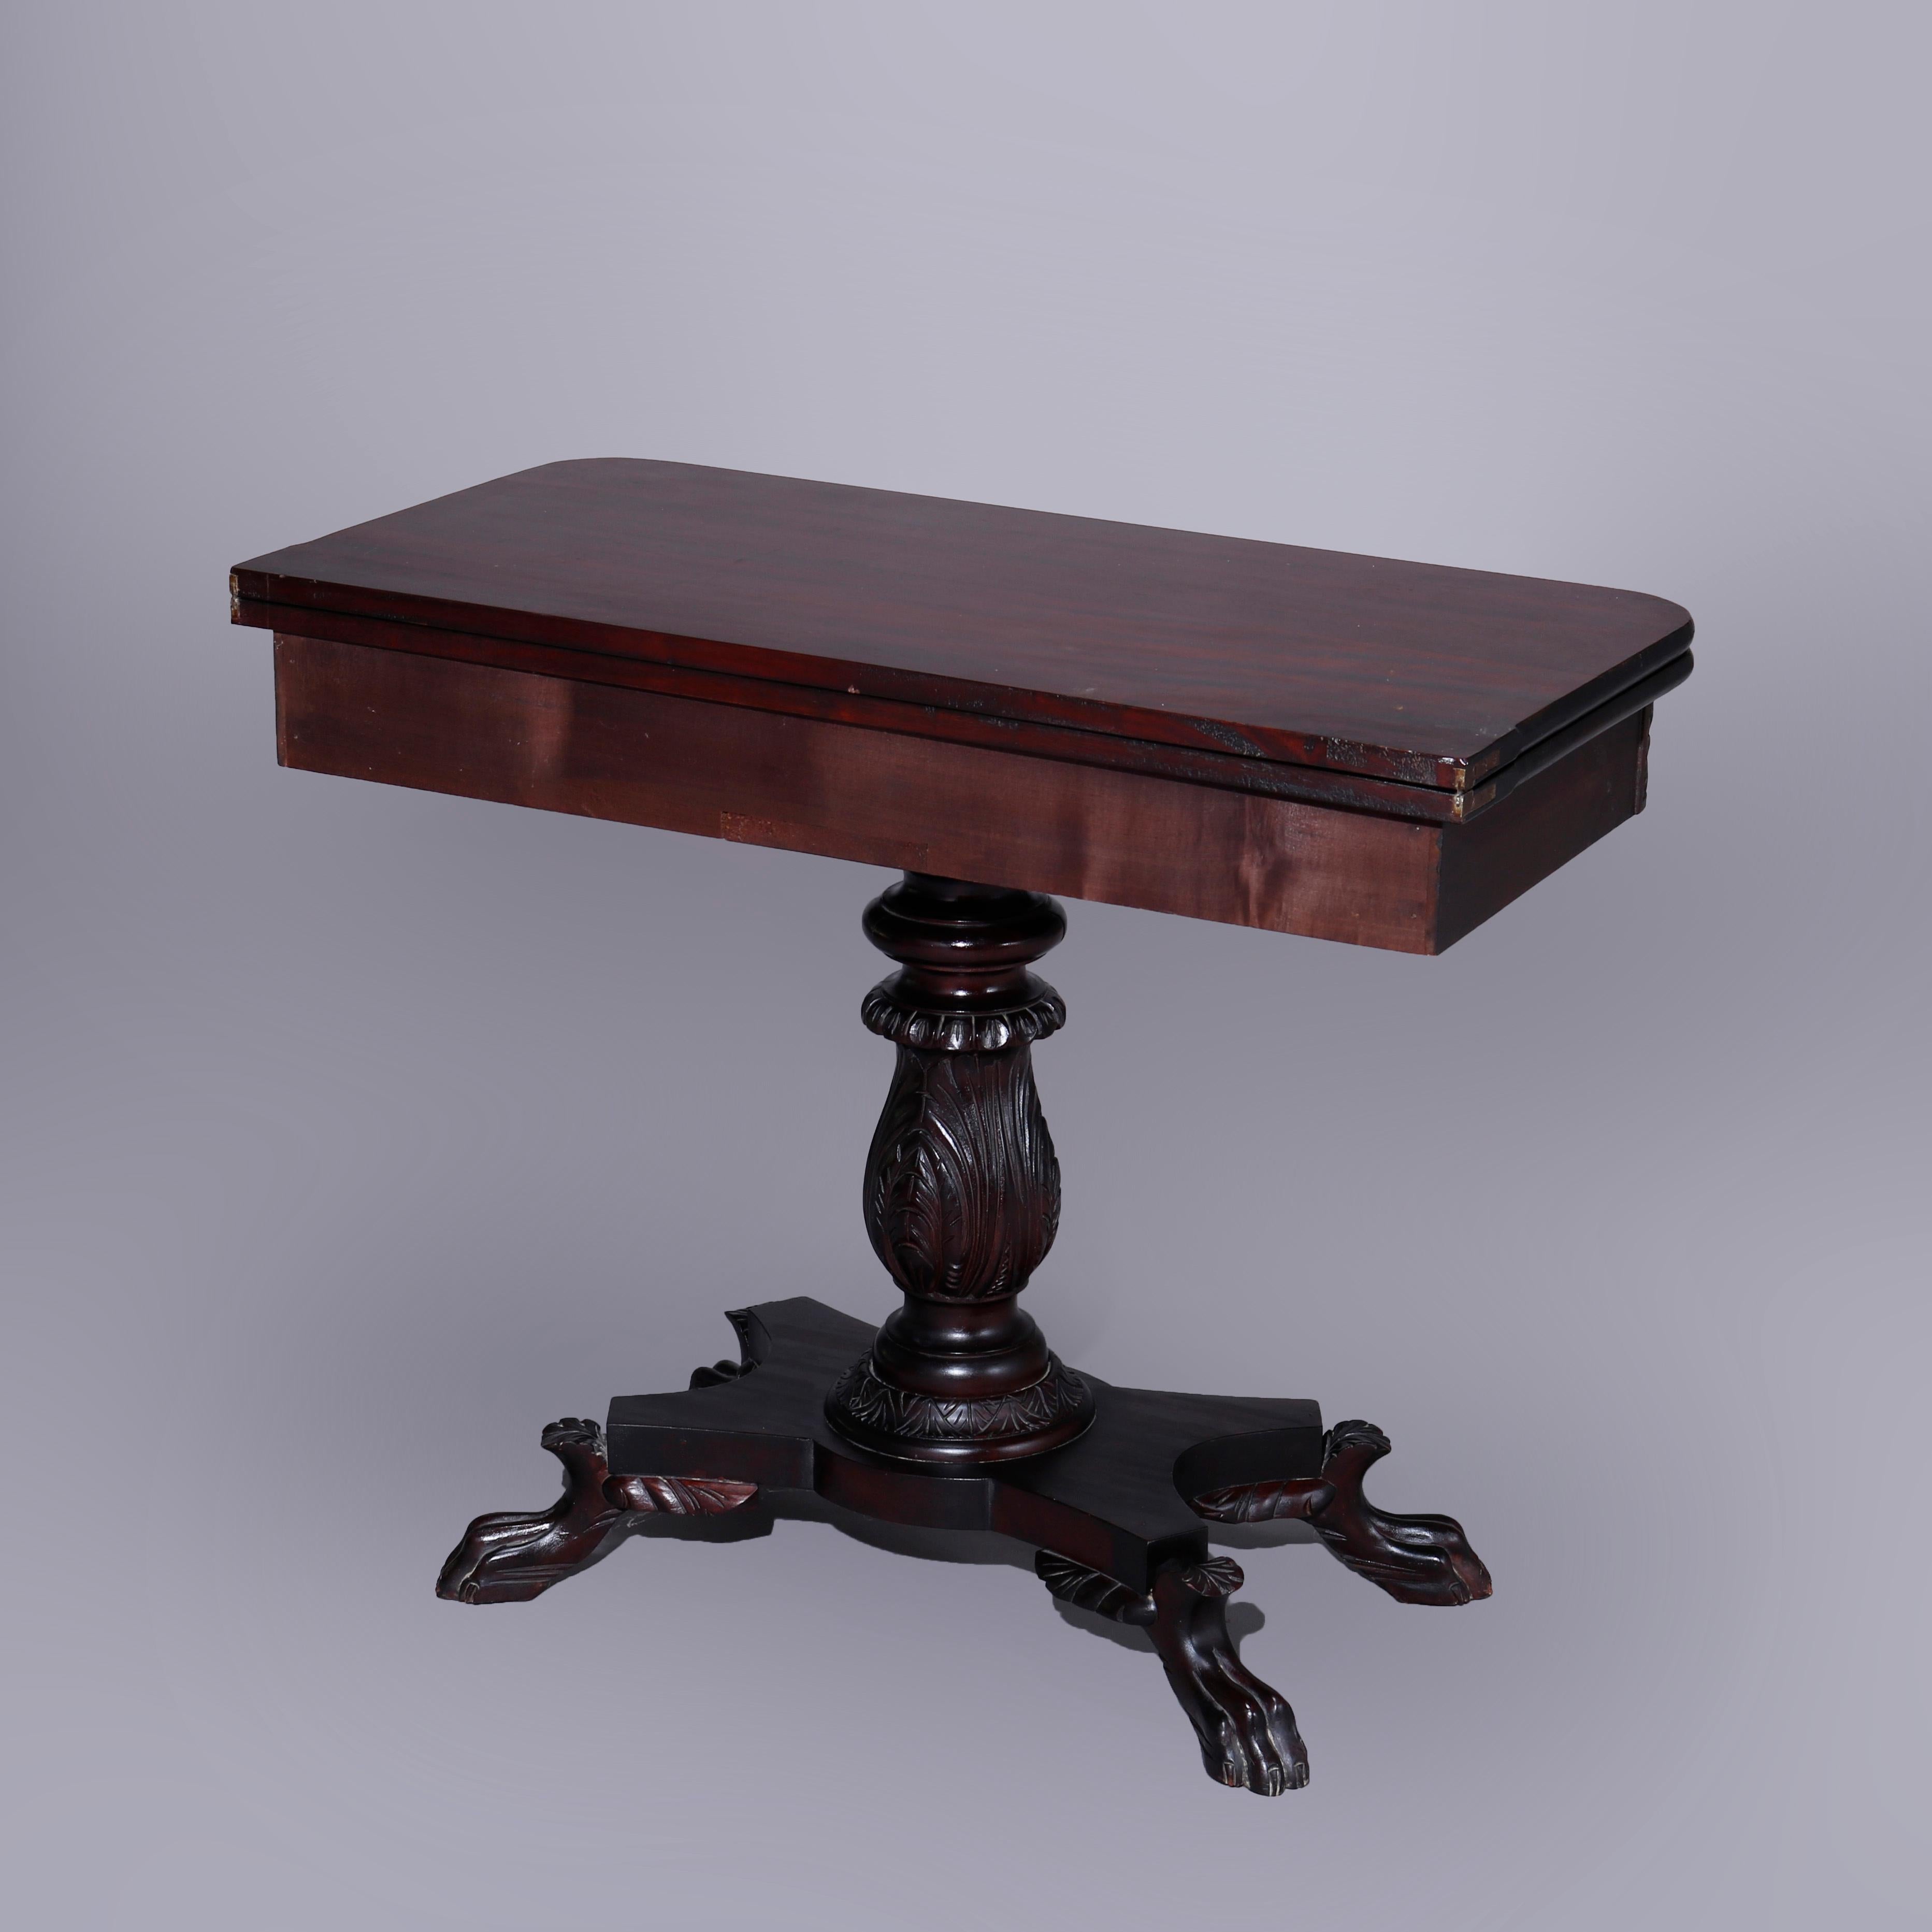 Antique American Empire Classical Carved Mahogany Claw Foot Card Table c1840 3